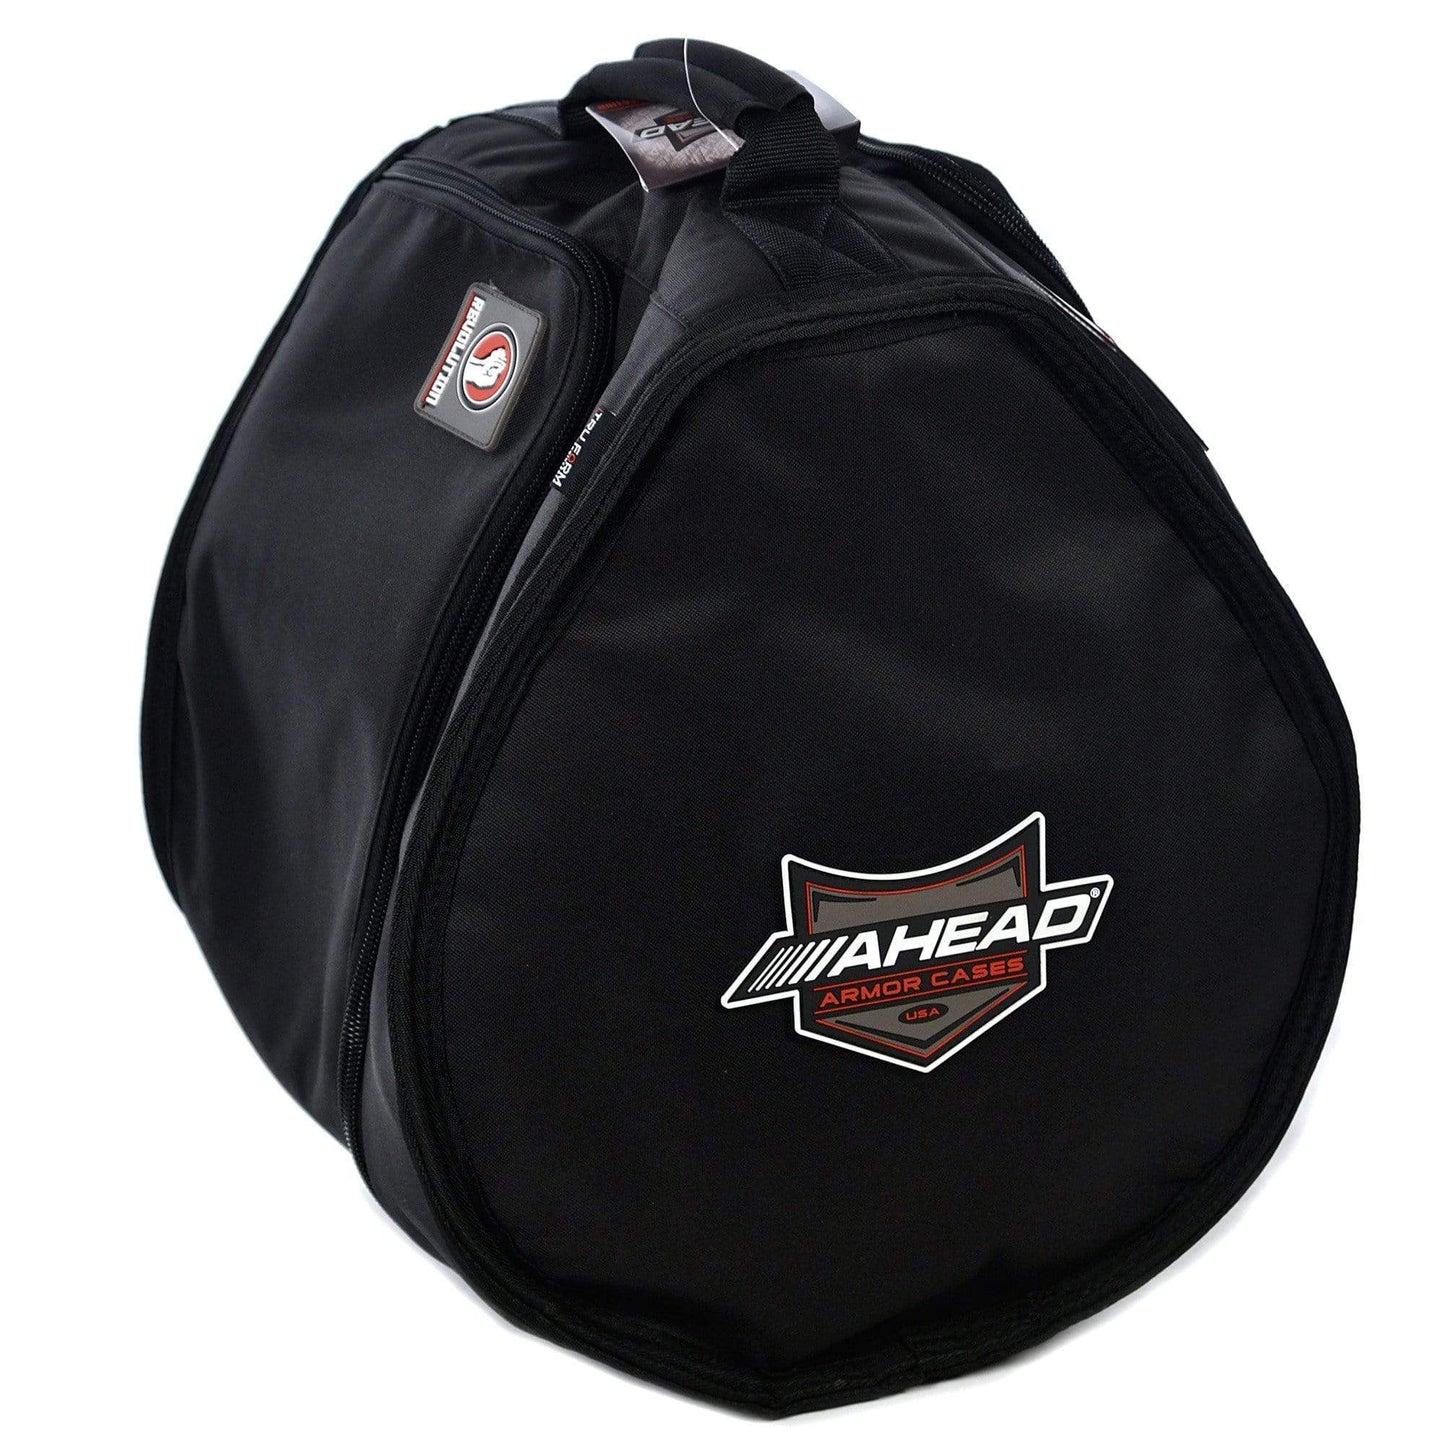 Ahead 11x13 Armor Tom Soft Case Drums and Percussion / Parts and Accessories / Cases and Bags